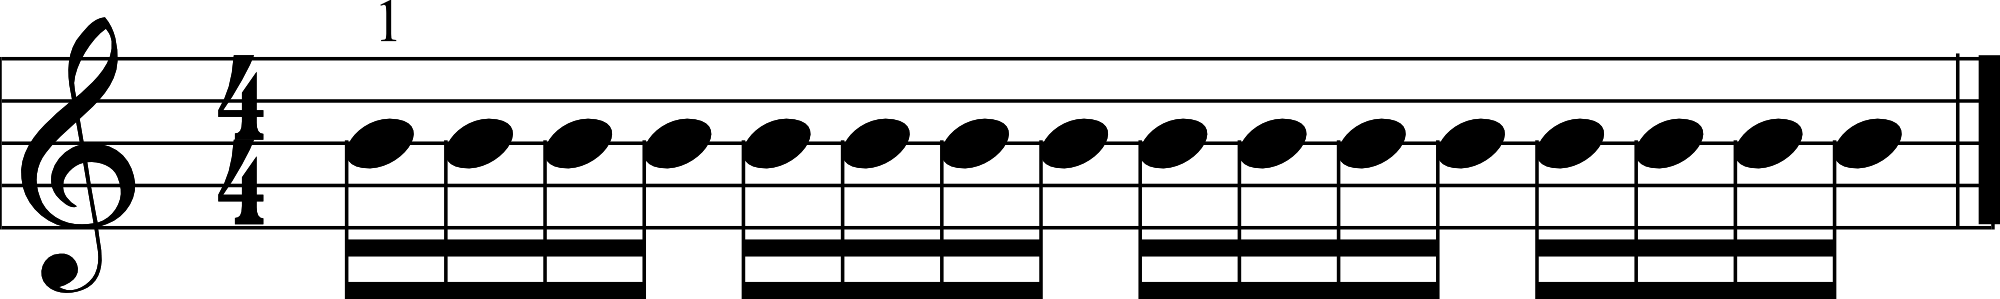 Sixteenth Note Example